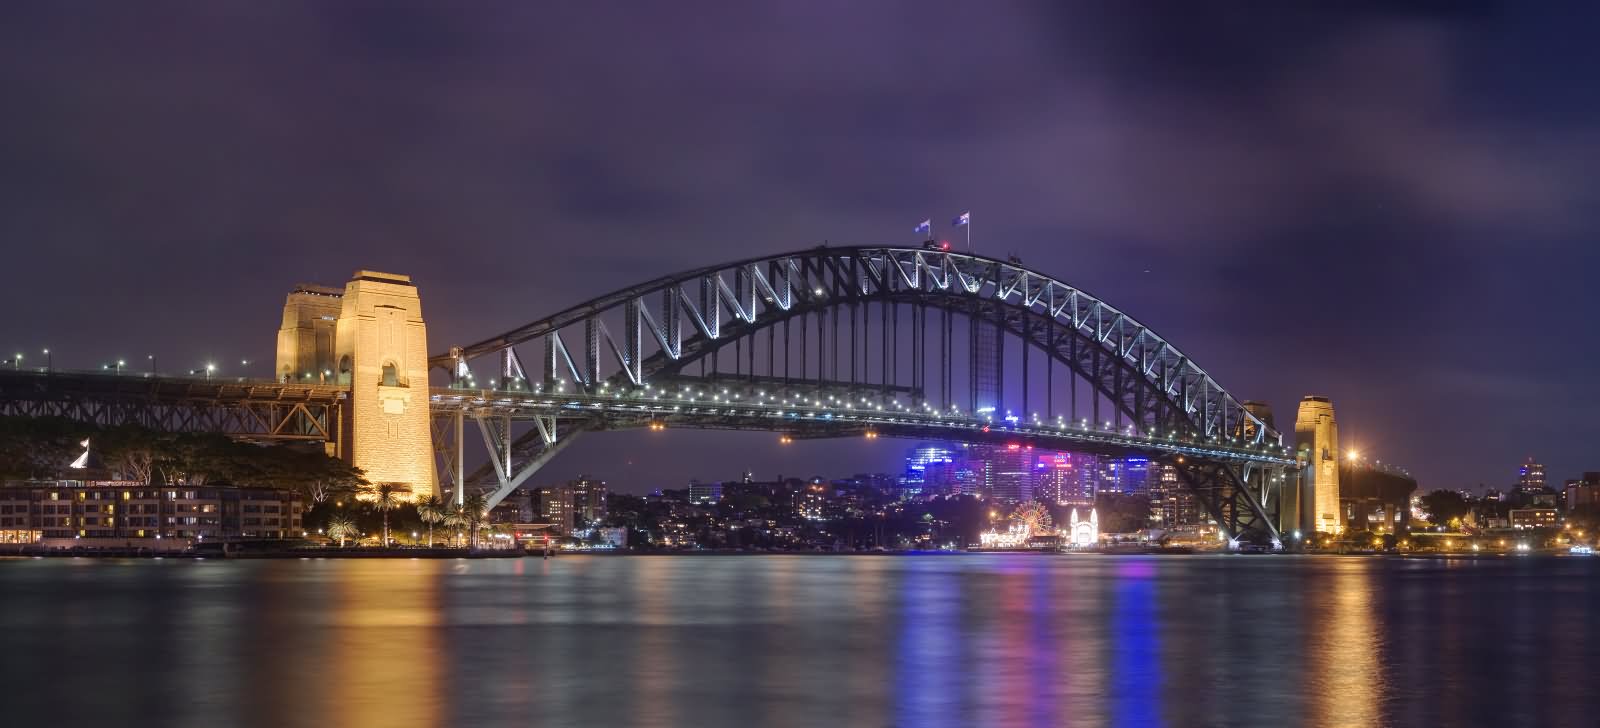 Cool Sydney Harbour Bridge Incredible Picture At Night